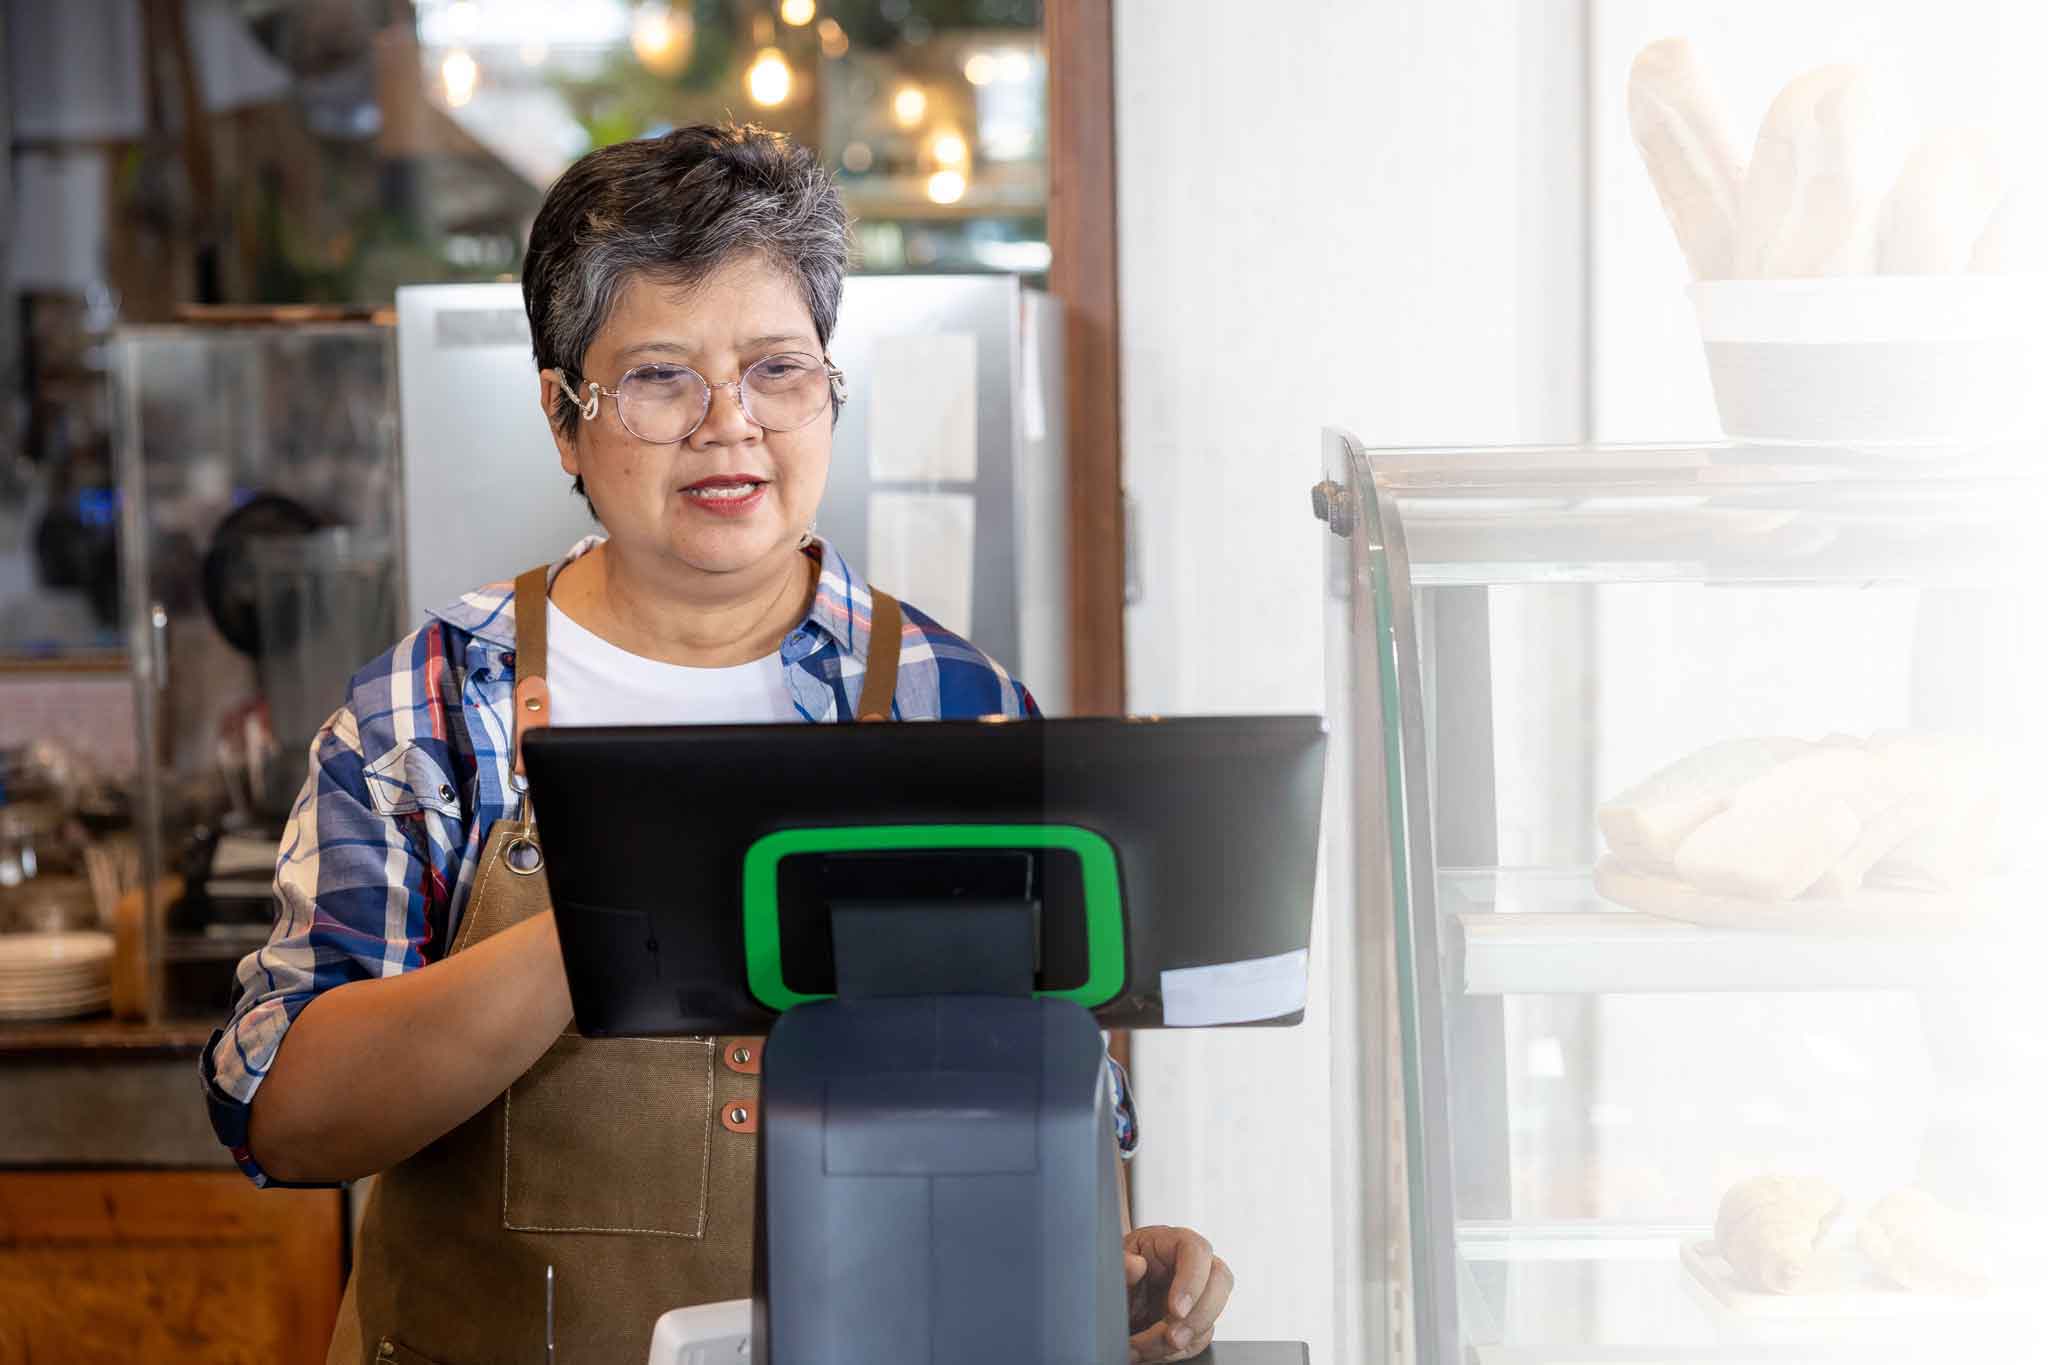 Business owner standing at checkout